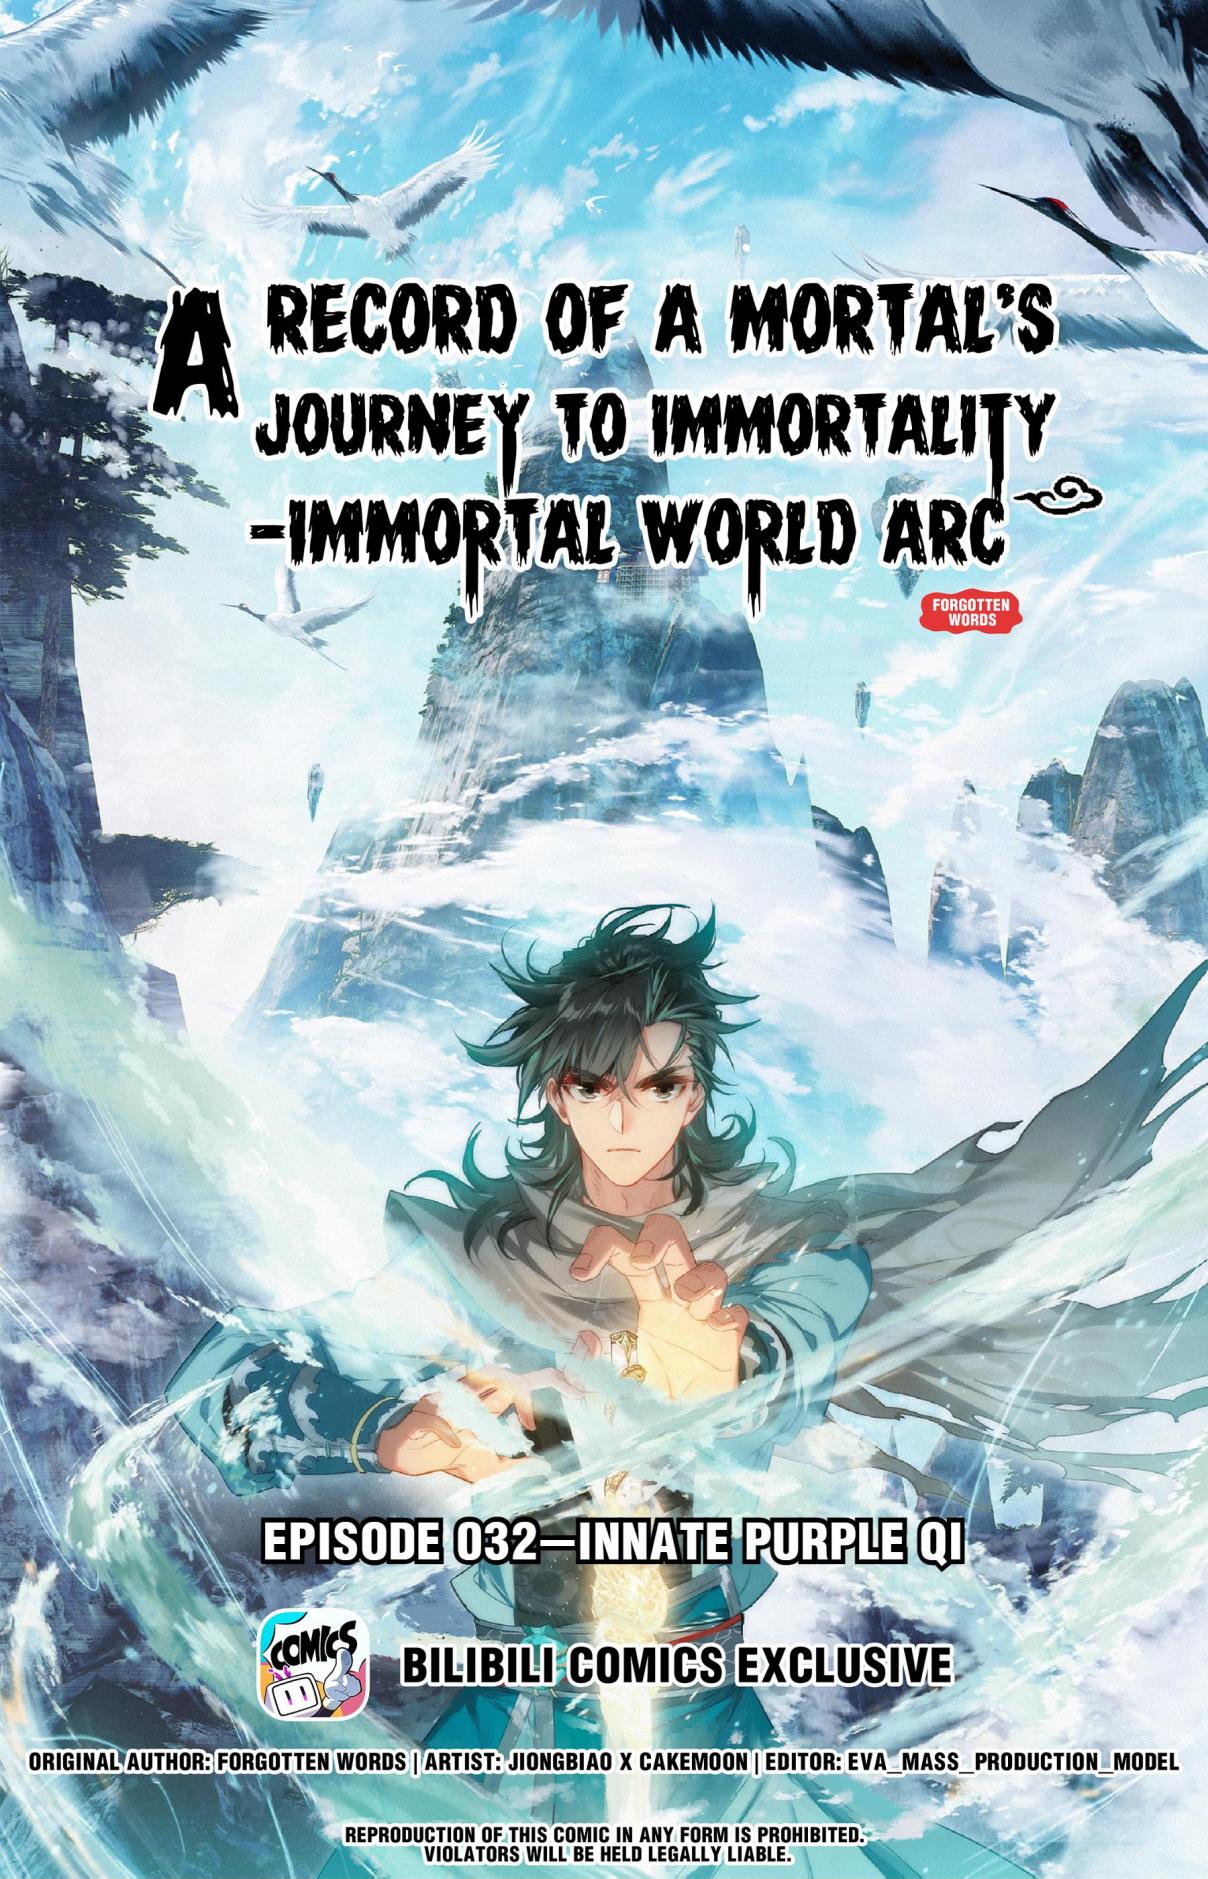 A Record of a Mortal's Journey to Immortality—Immortal World Arc 32 Innate Purple Qi